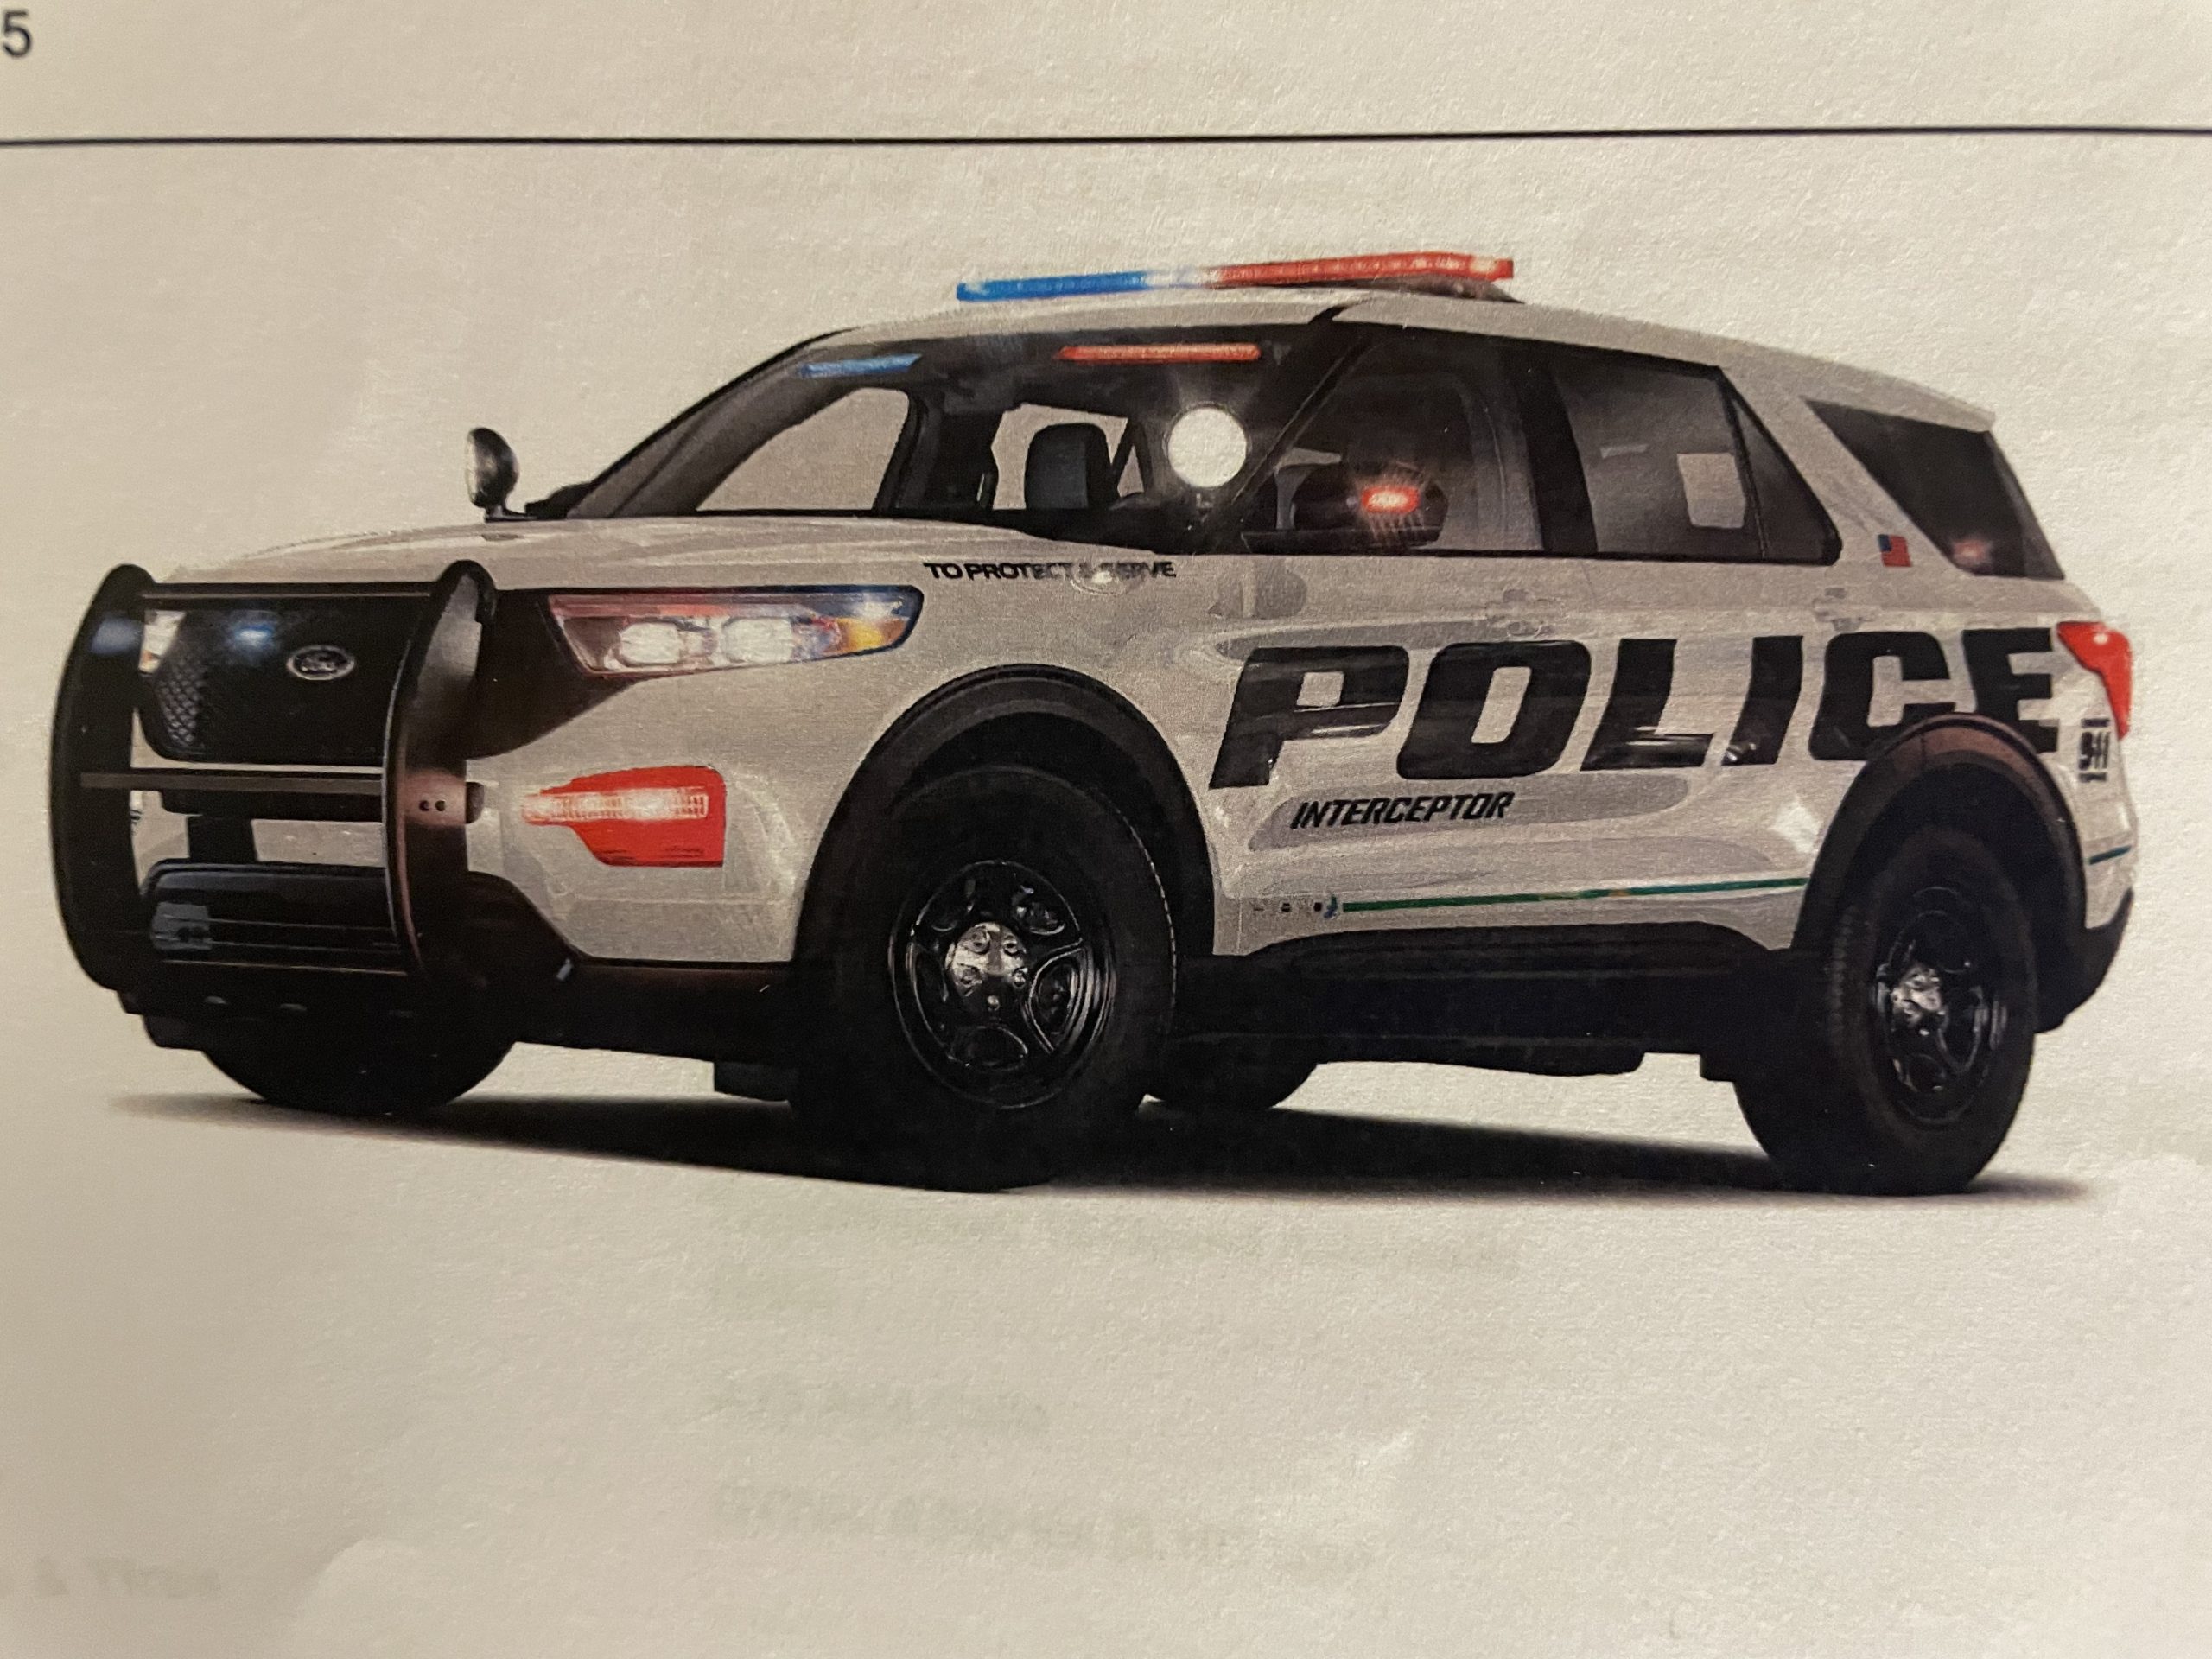 Argo City Council approves purchase of two new police vehicles